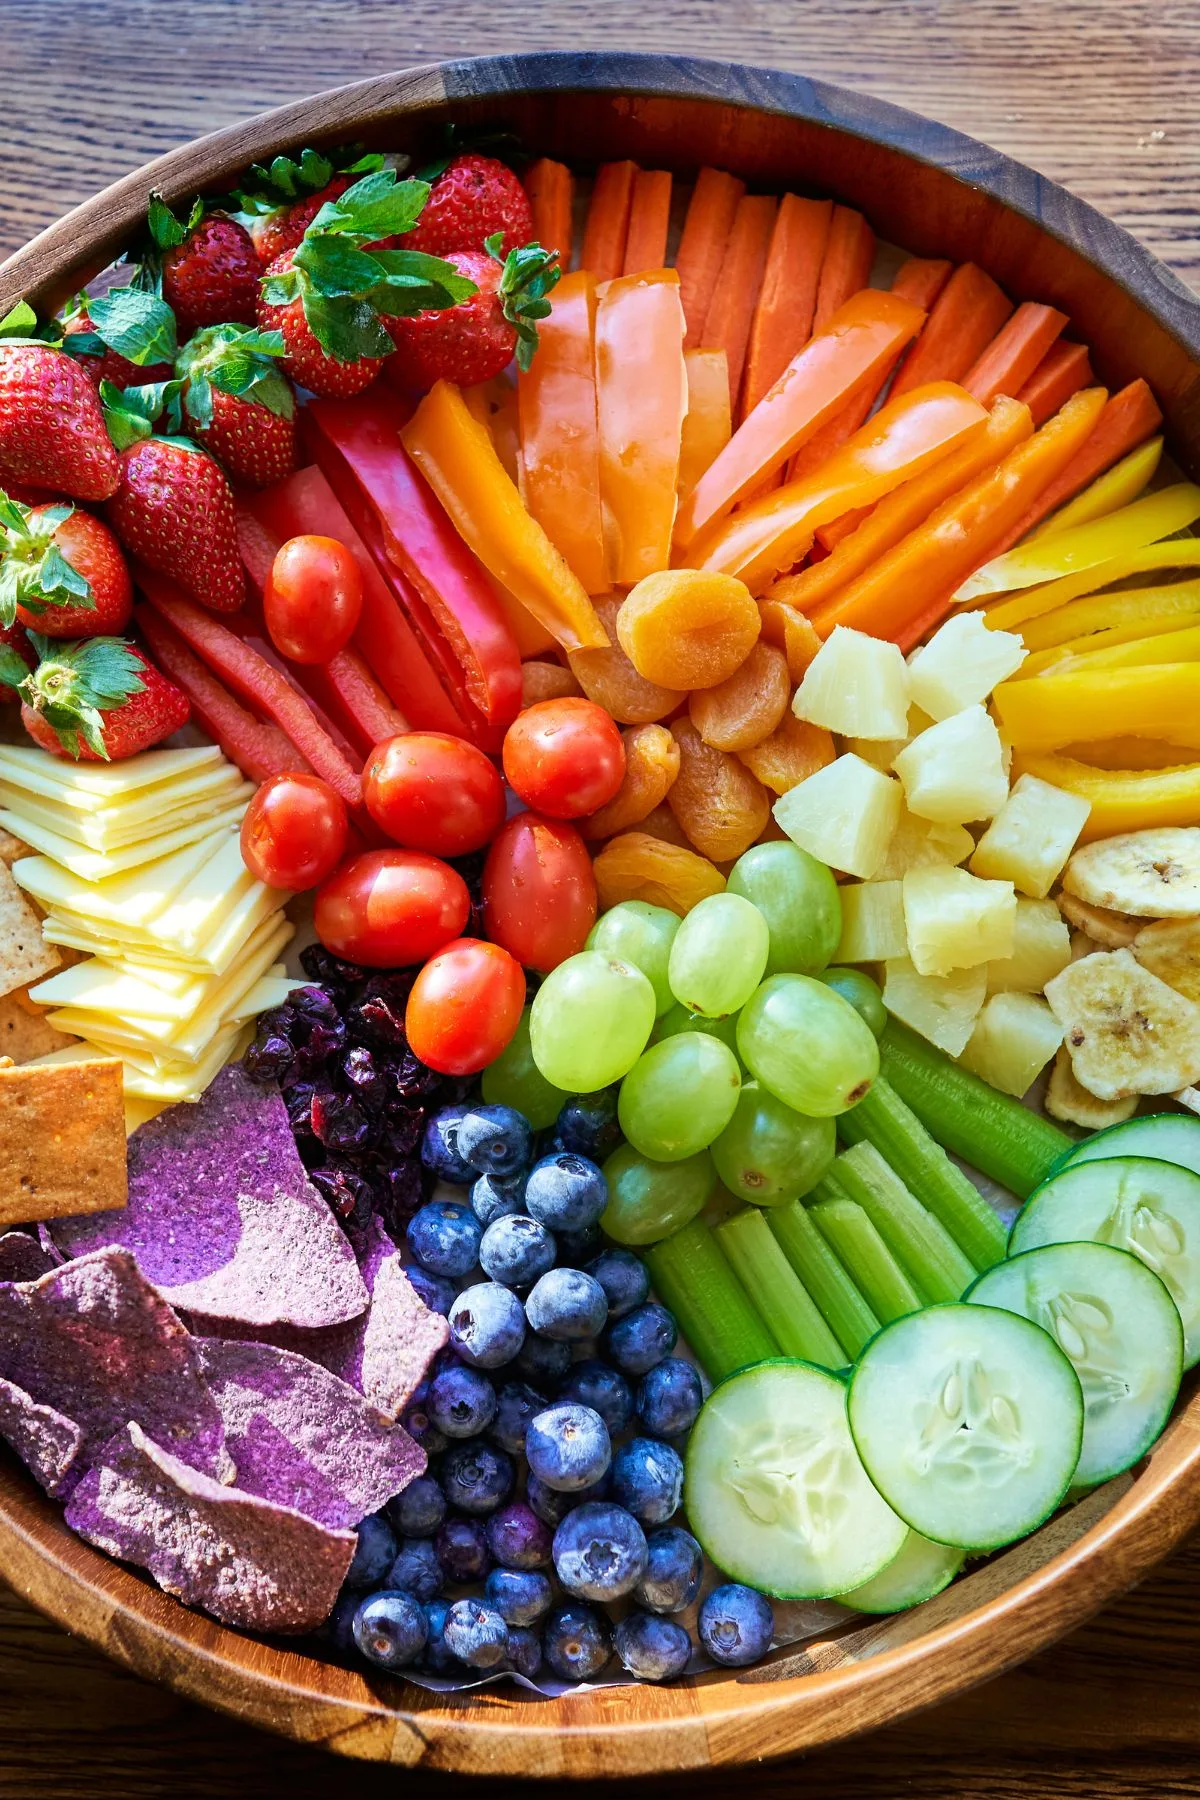 A large platter filled with fruits and vegetables like tomatoes, blueberries, carrots, and grapes.